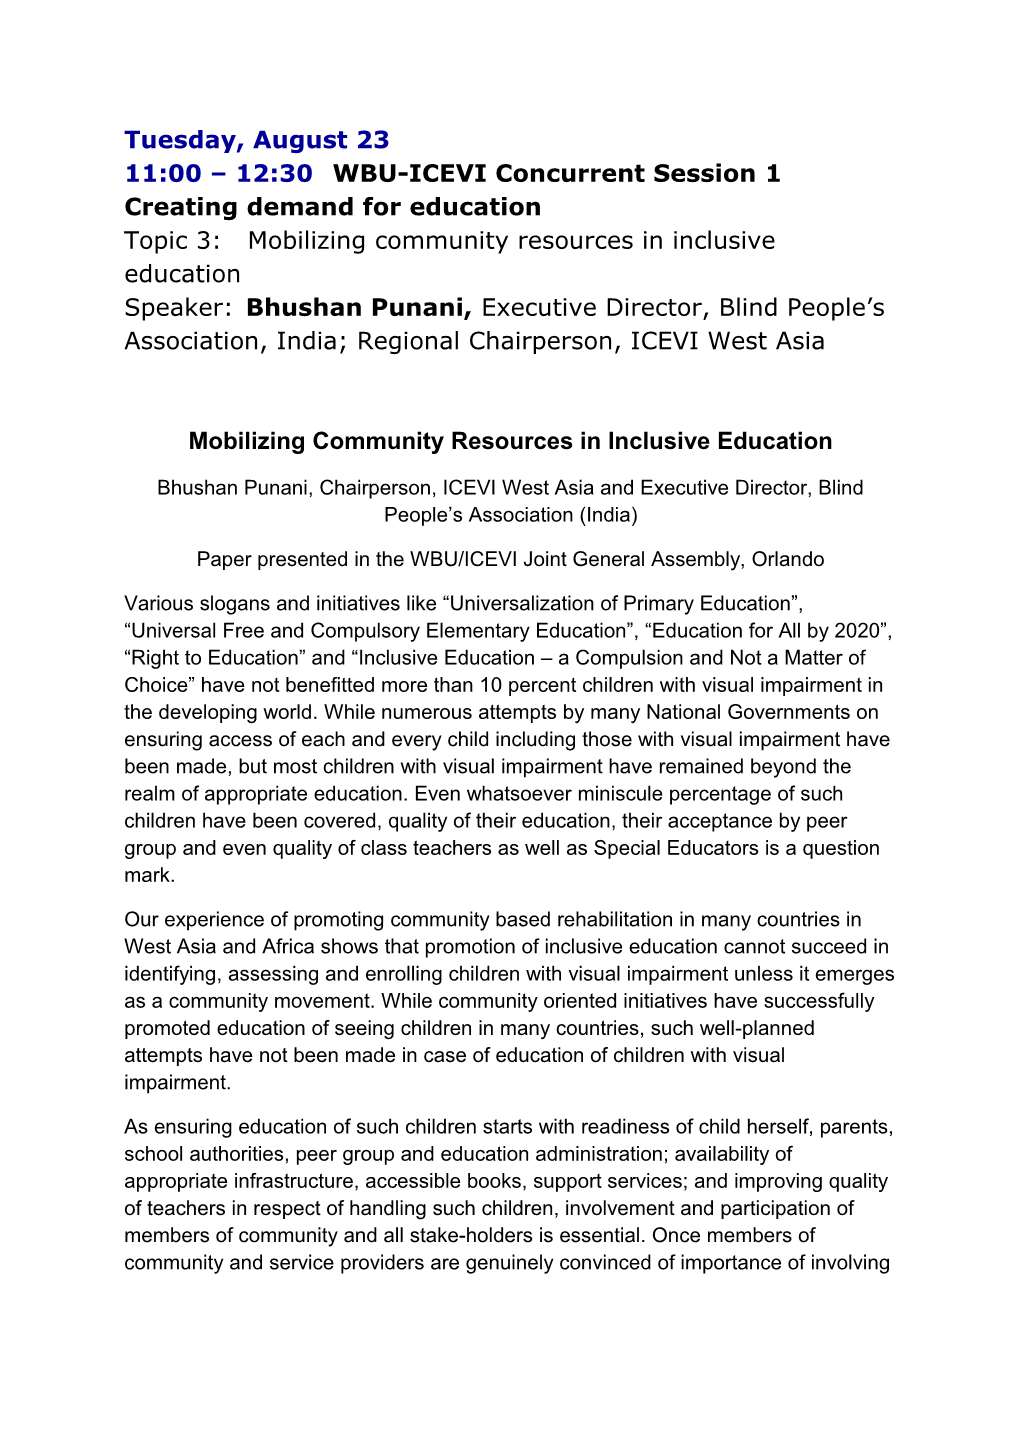 Aug 23 Joint Concurrent Session 1 - Creating Demand for Education - Mobilizing Resource